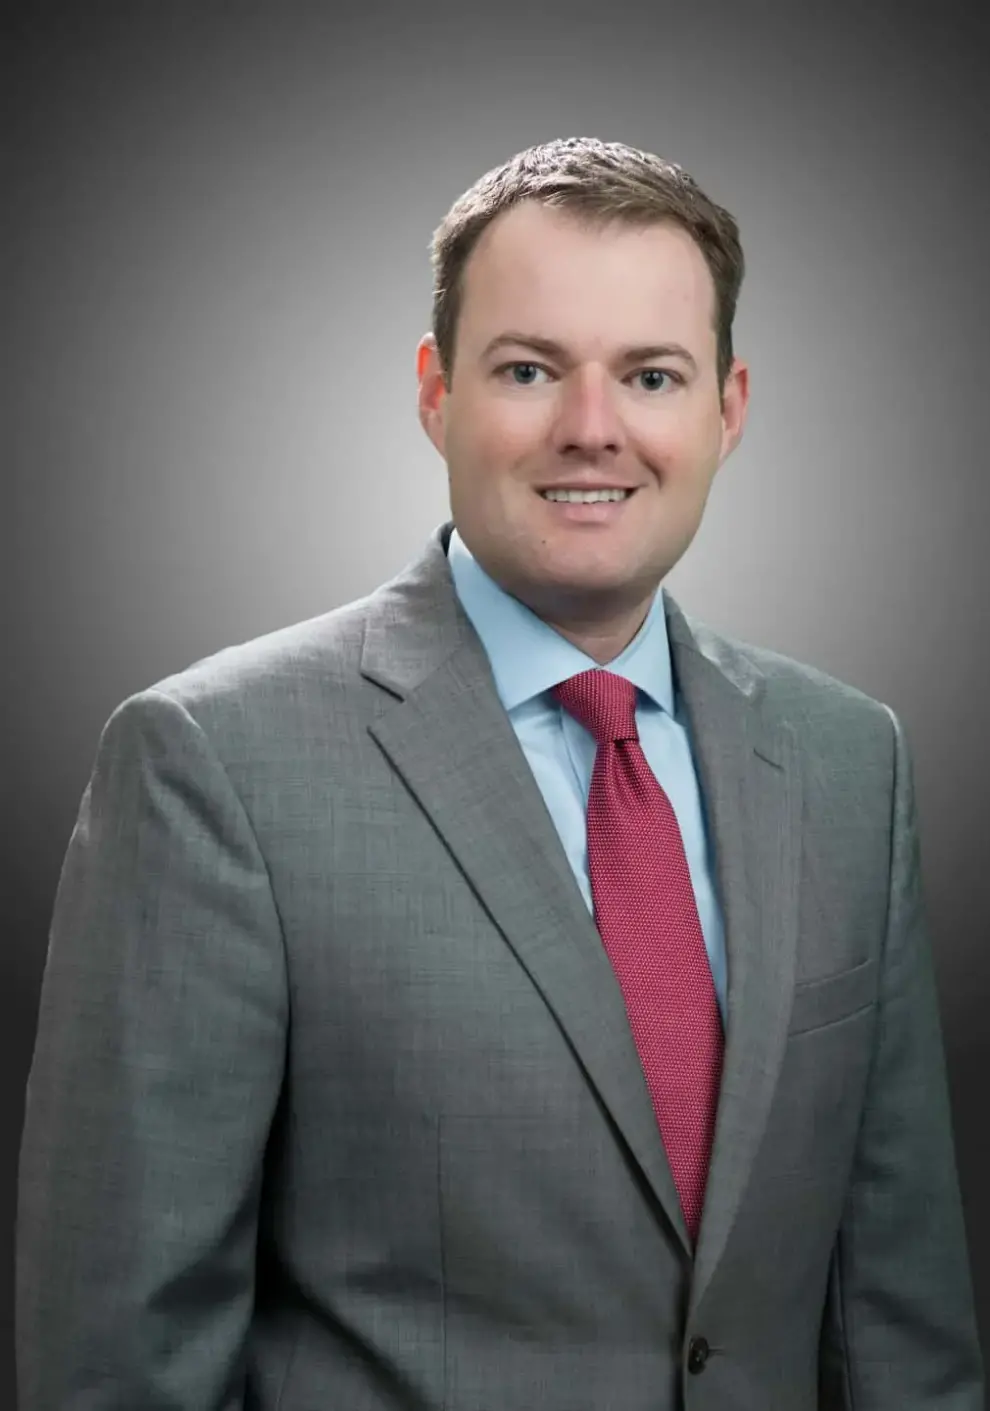 Scott Haywood selected as new office leader in central and south Texas offices